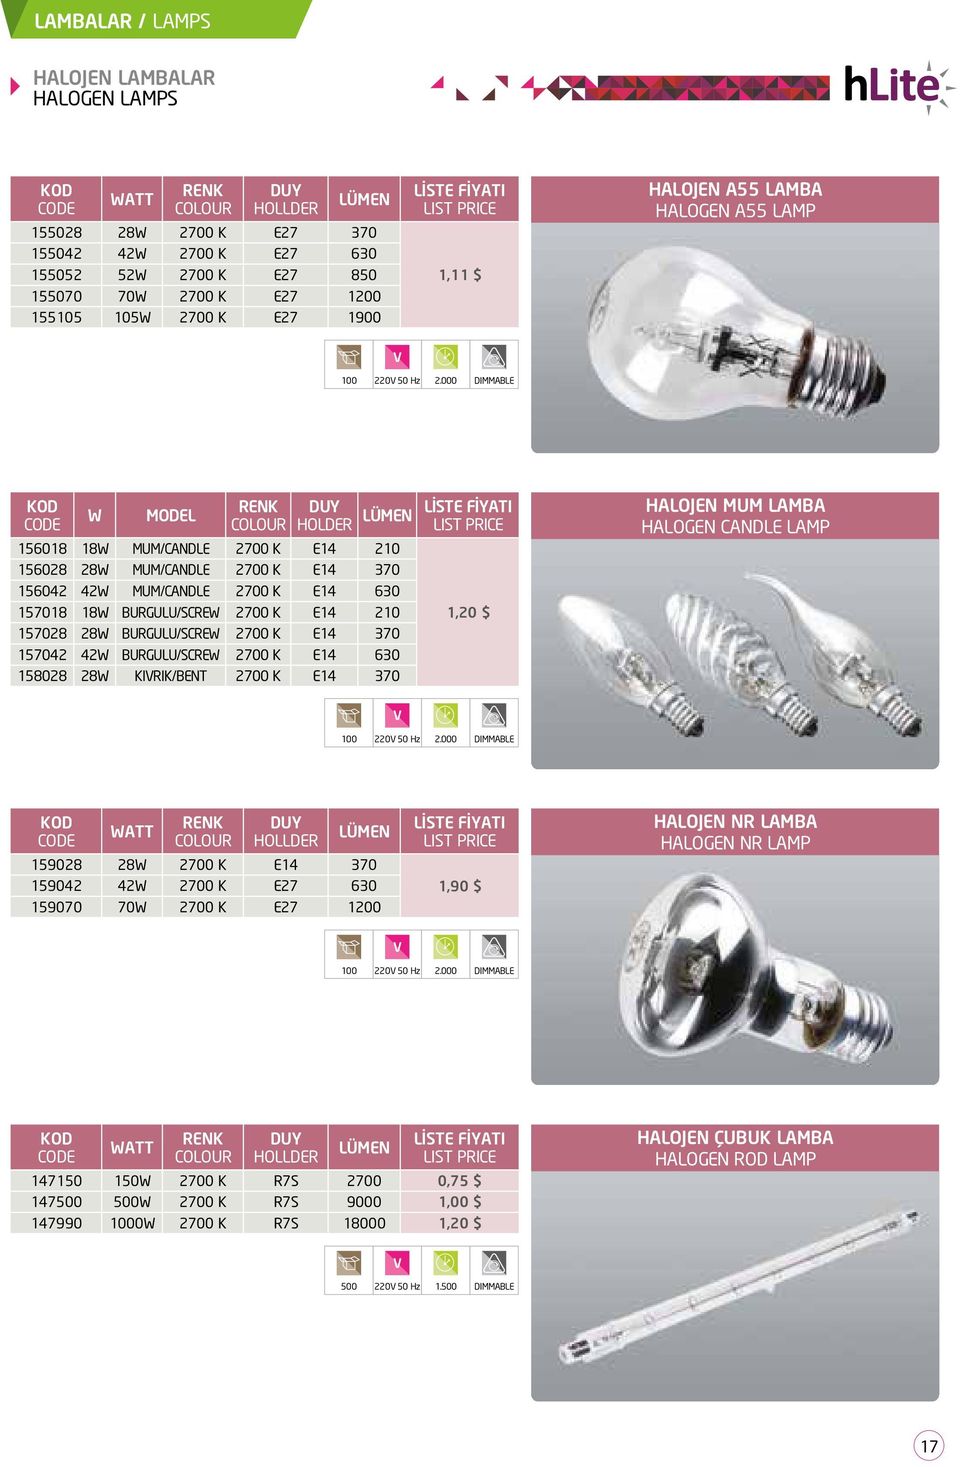 000 DIMMABLE W MODEL HOLDER 156018 18W MUM/CANDLE 2700 K E14 210 156028 28W MUM/CANDLE 2700 K E14 370 156042 42W MUM/CANDLE 2700 K E14 630 157018 18W BURGULU/SCREW 2700 K E14 210 157028 28W